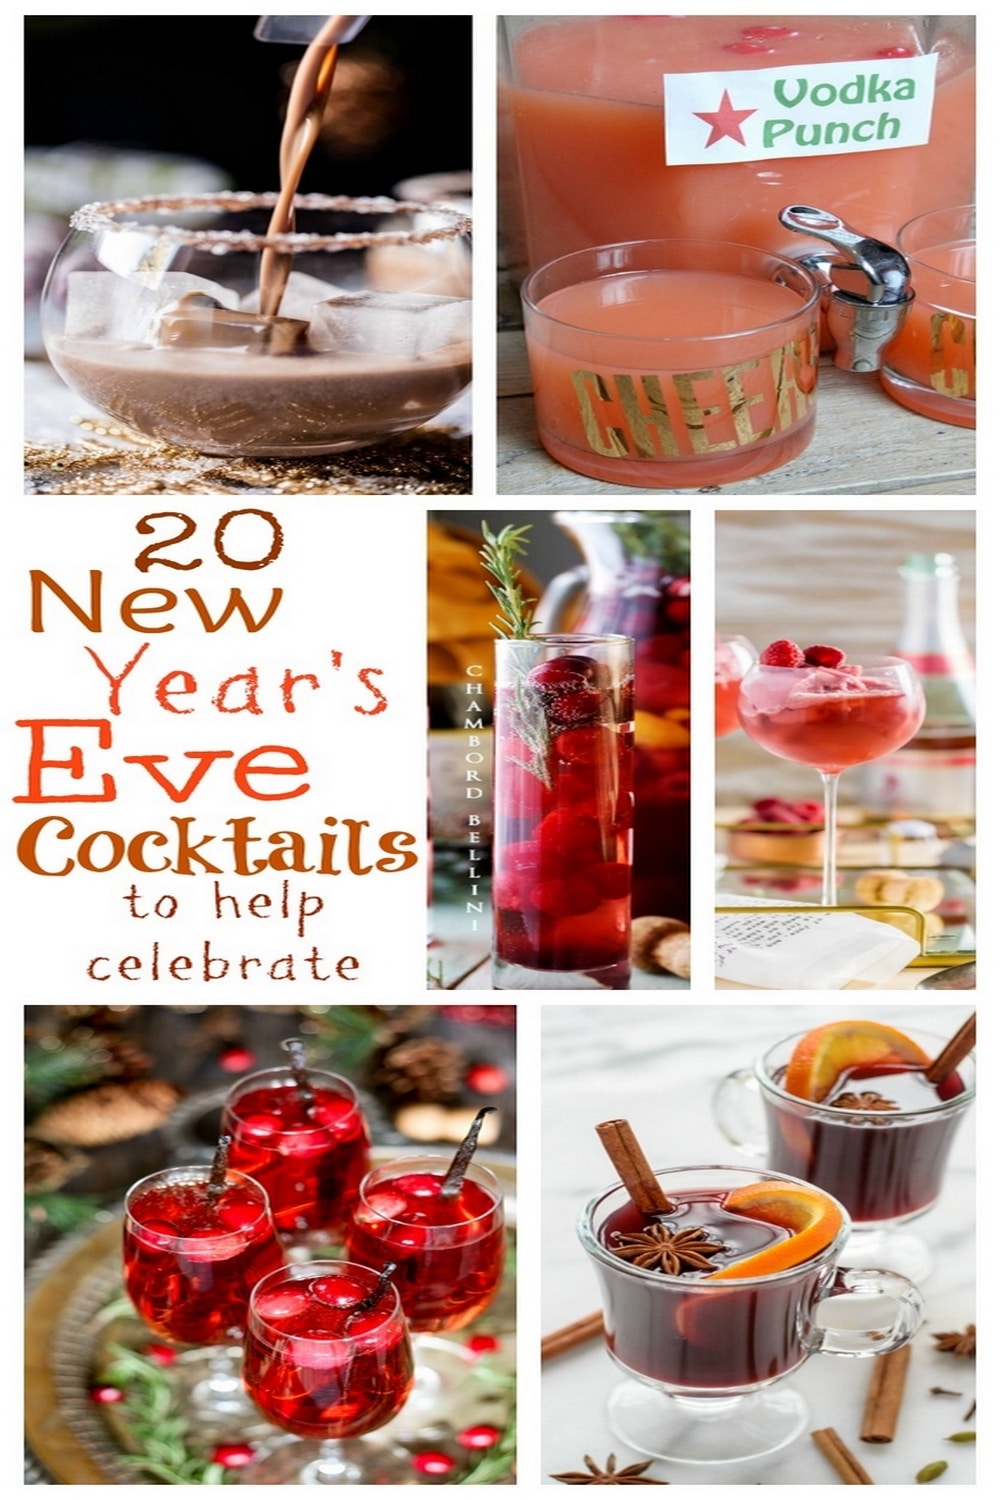 Looking for the perfect holiday drink to help bring the year to a close? This collection of 20 New Year's Eve Cocktails will help keep the party going until the clock strikes twelve. via @cmpollak1